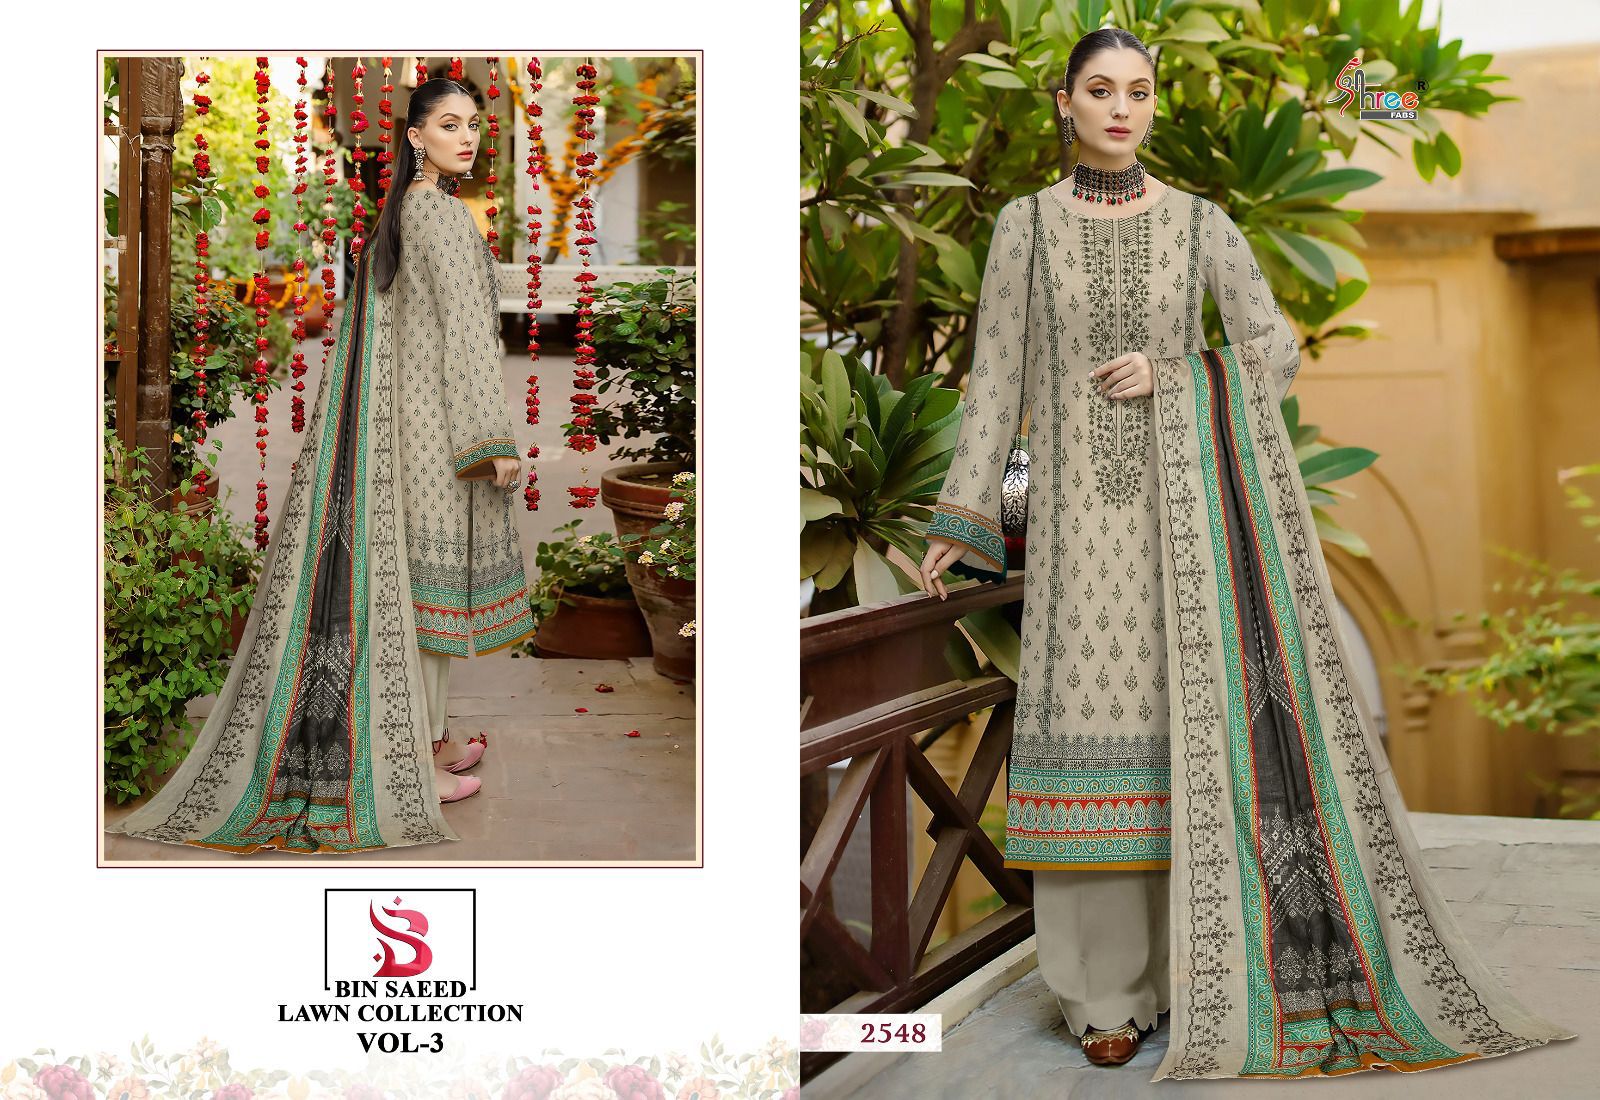 Shree Bin Saeed Lawn Collection Vol 3 collection 7